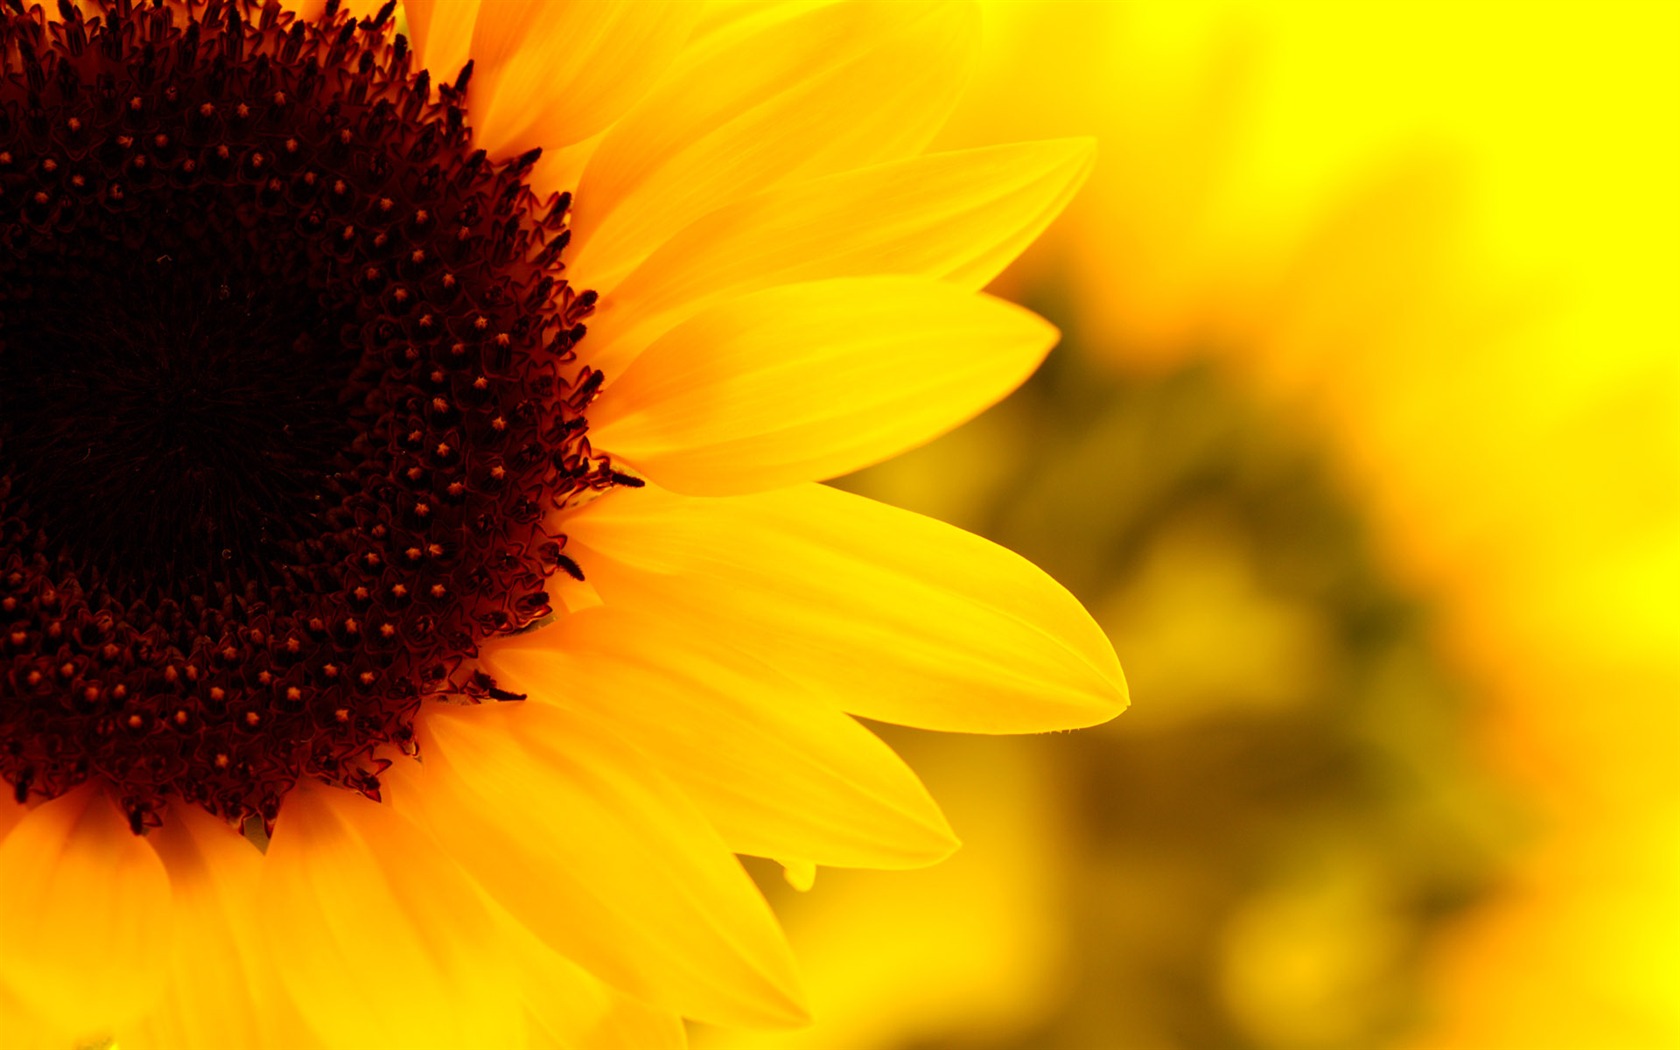 Sunny sunflower photo HD Wallpapers #10 - 1680x1050